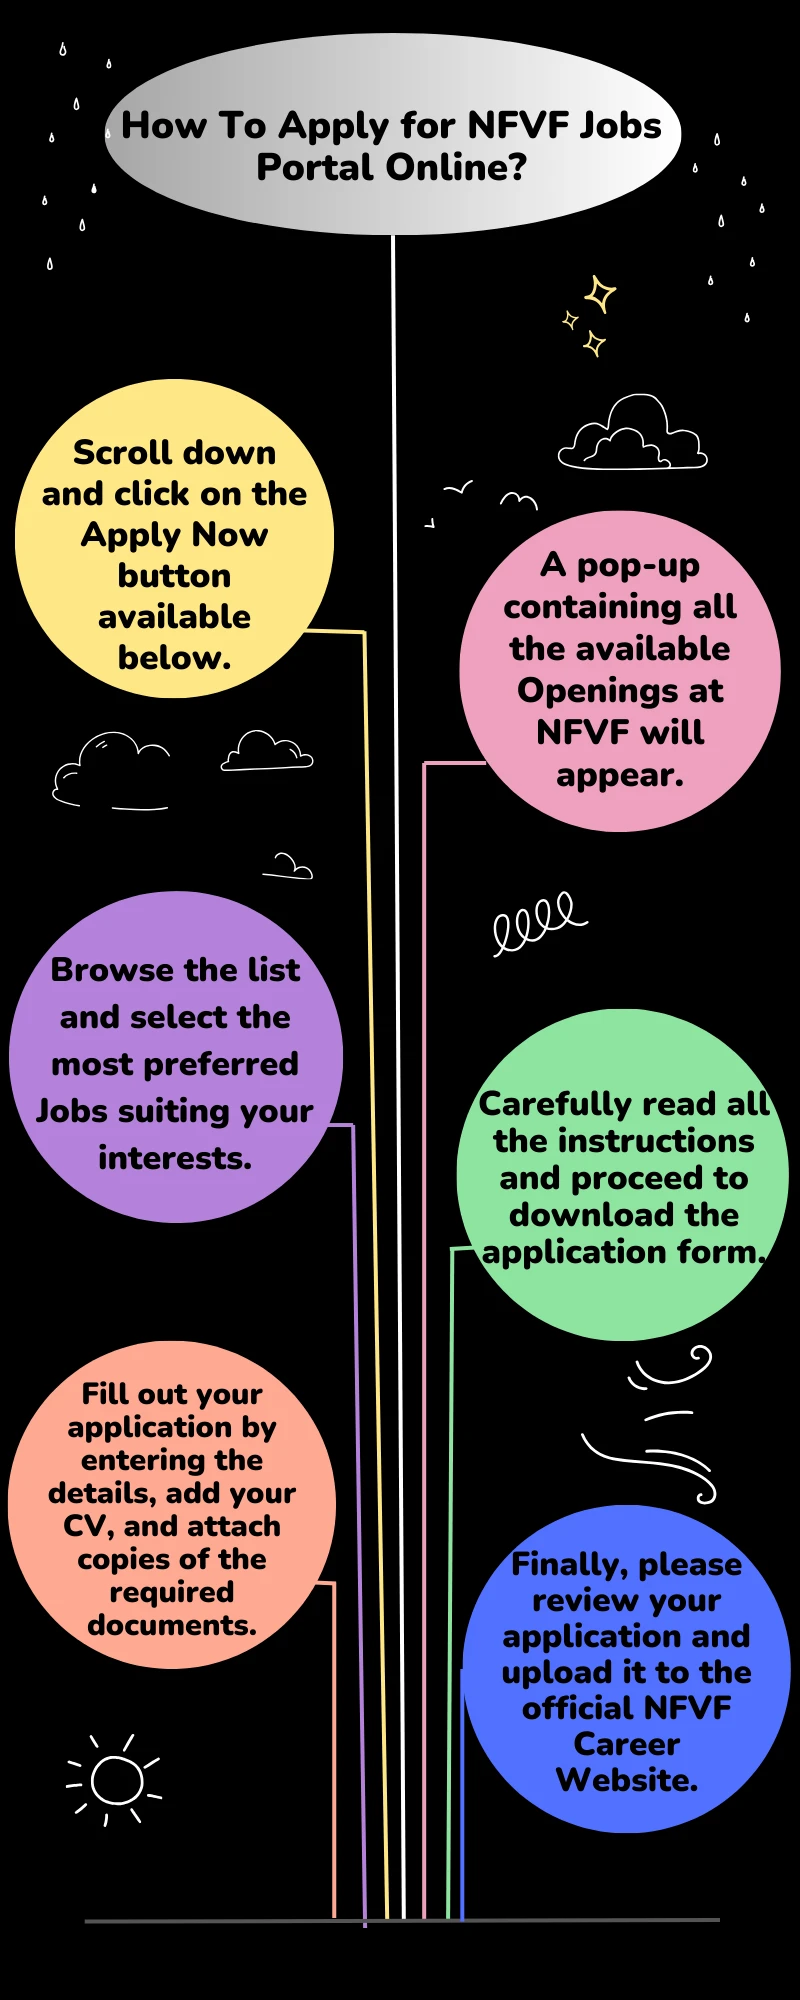 How To Apply for NFVF Jobs Portal Online?